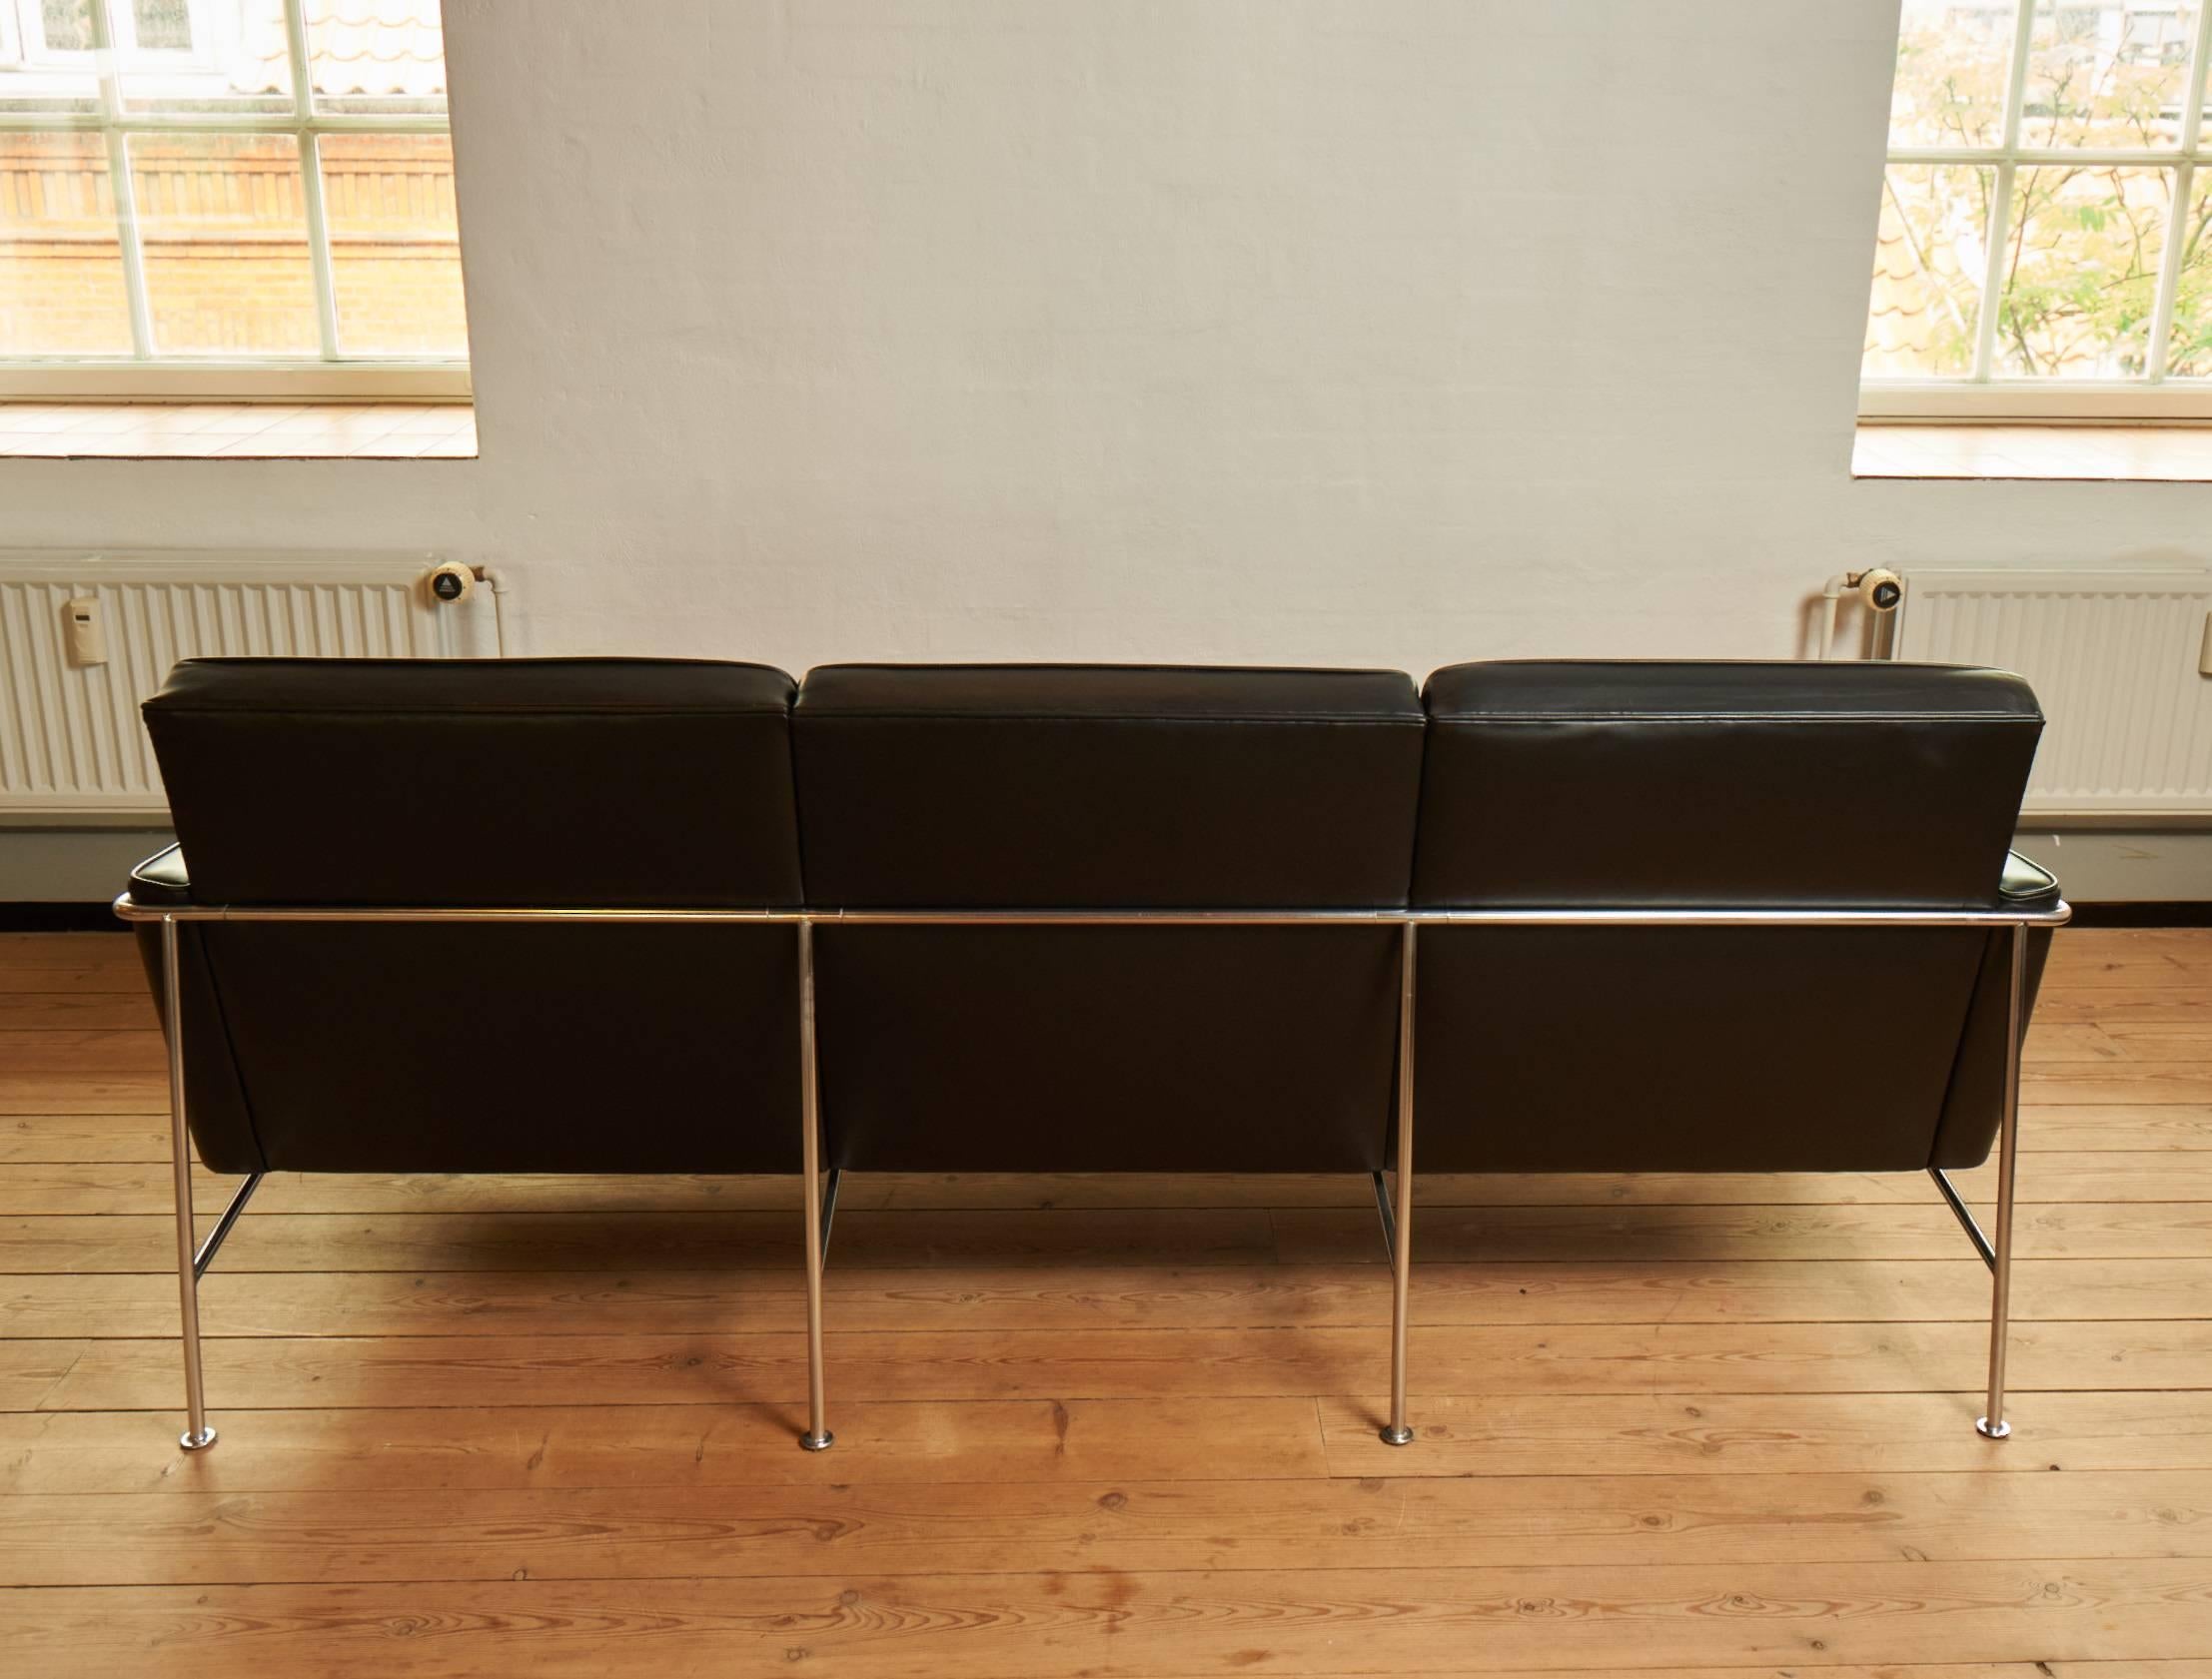 Arne Jacobsens 3302 Airport sofa, three people. In black savana leather.

The couch is used, but in a very good condition.